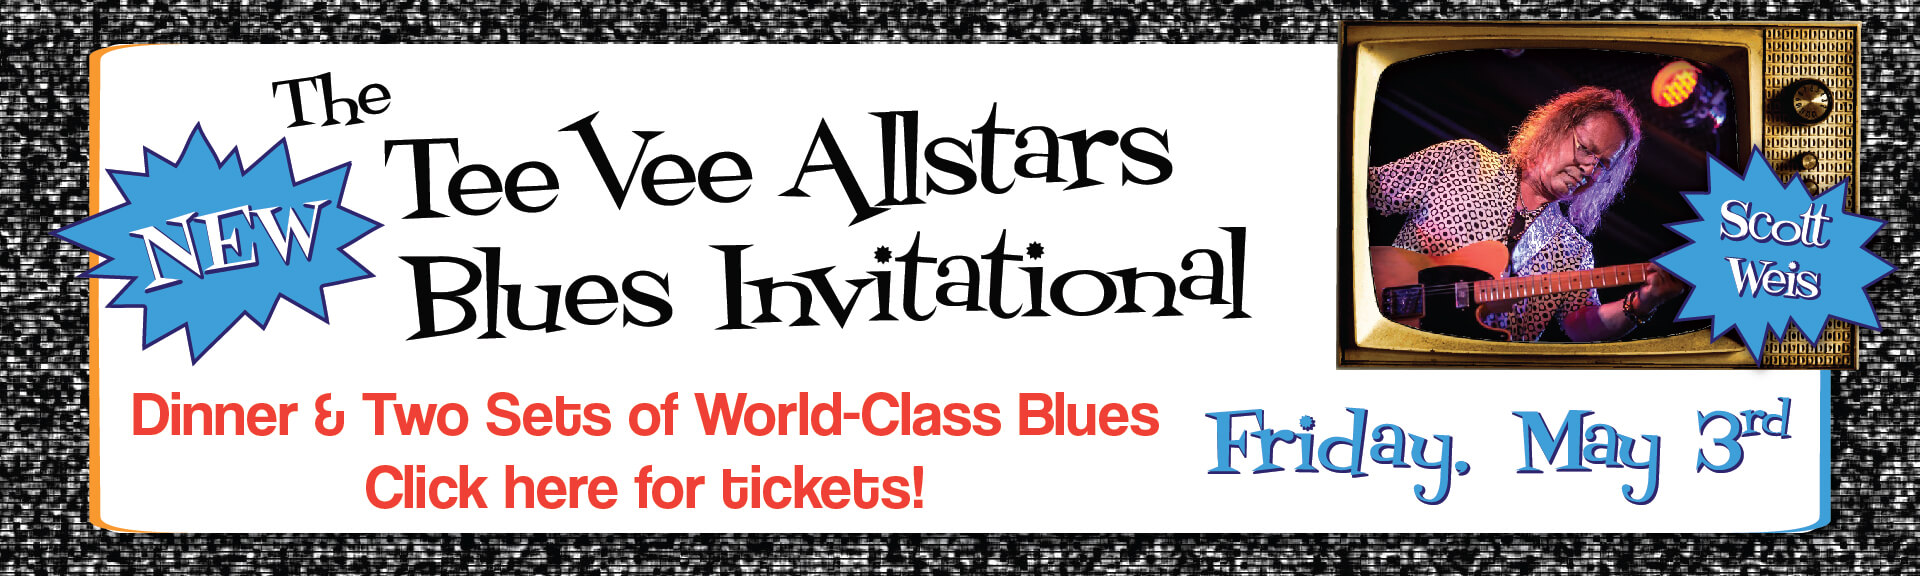 The New TeeVee Allstars Blues Invitational. Dinner & Two Sets of World-Class Blues.Click here for tickets! Friday, May 3rd